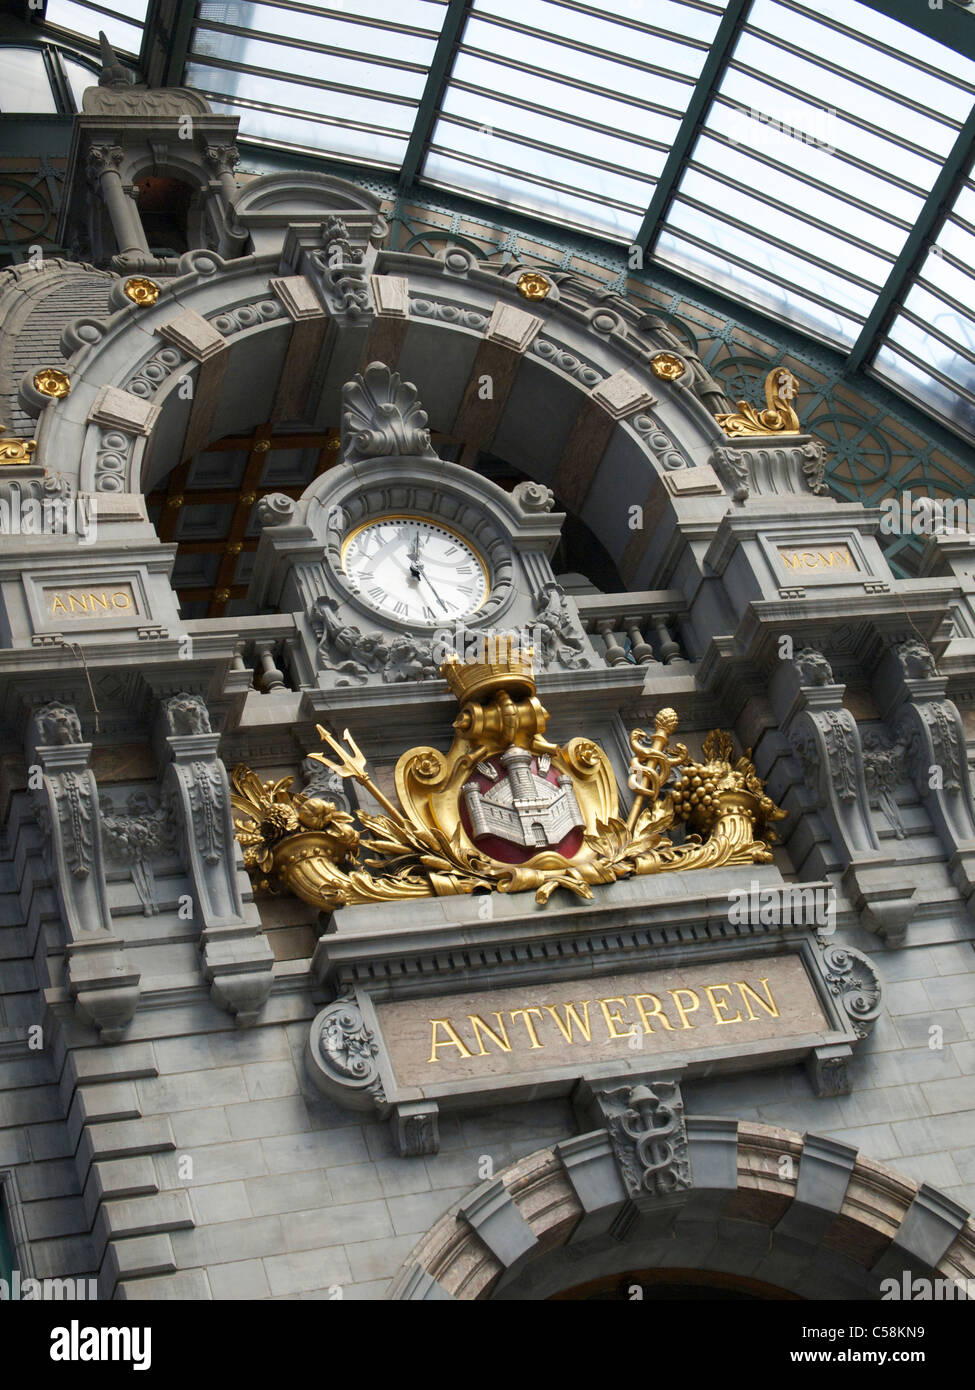 Clock in the recently renovated monumental Antwerp Central Station building, with Antwerpen name sign in gold. Stock Photo